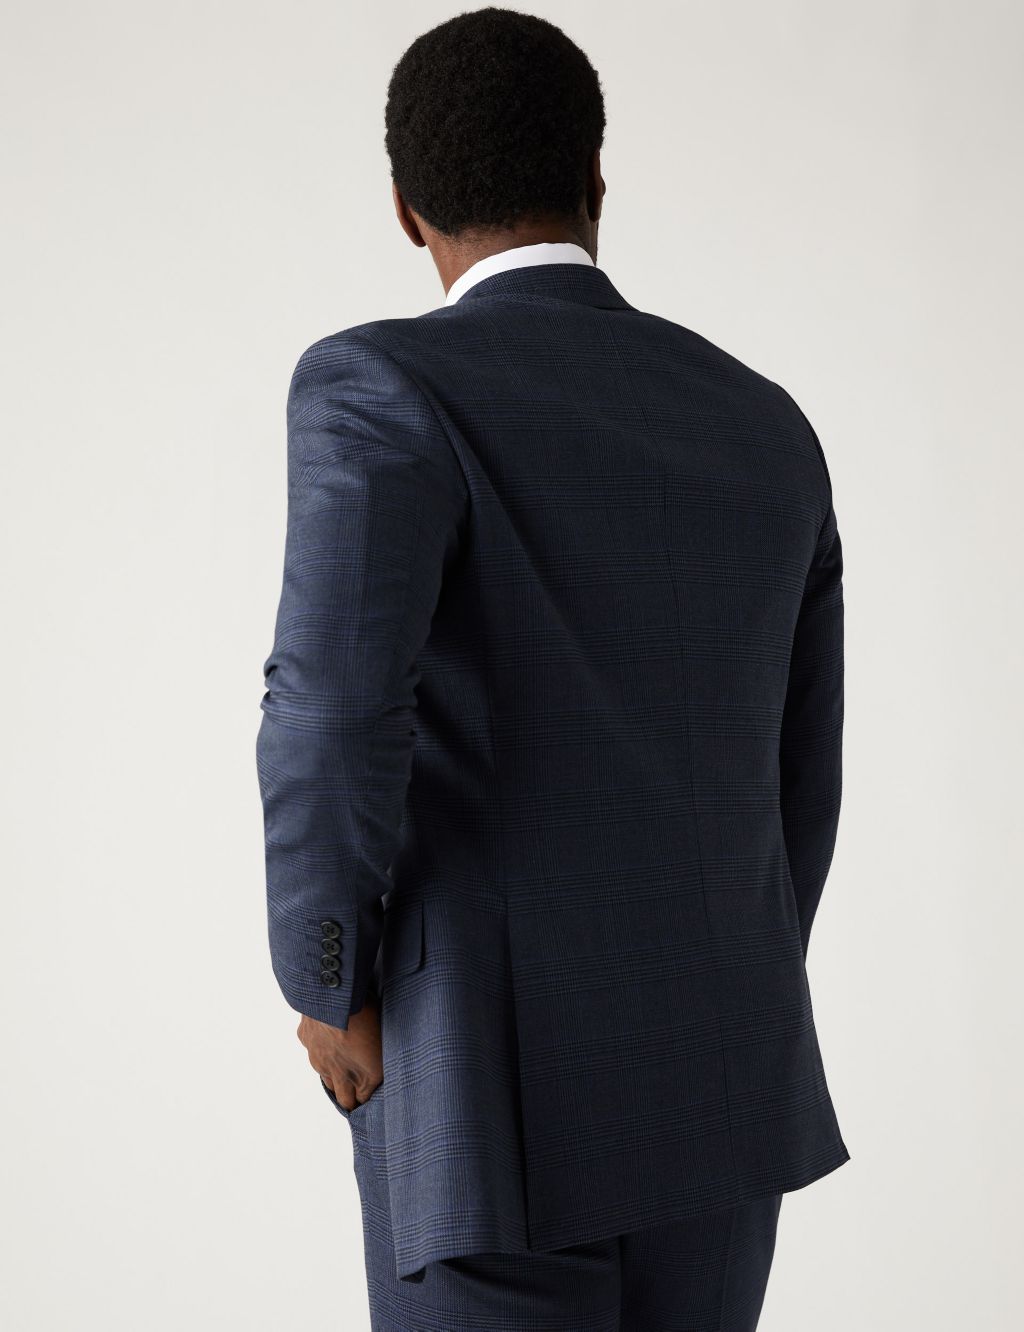 Regular Fit Prince of Wales Check Suit image 3